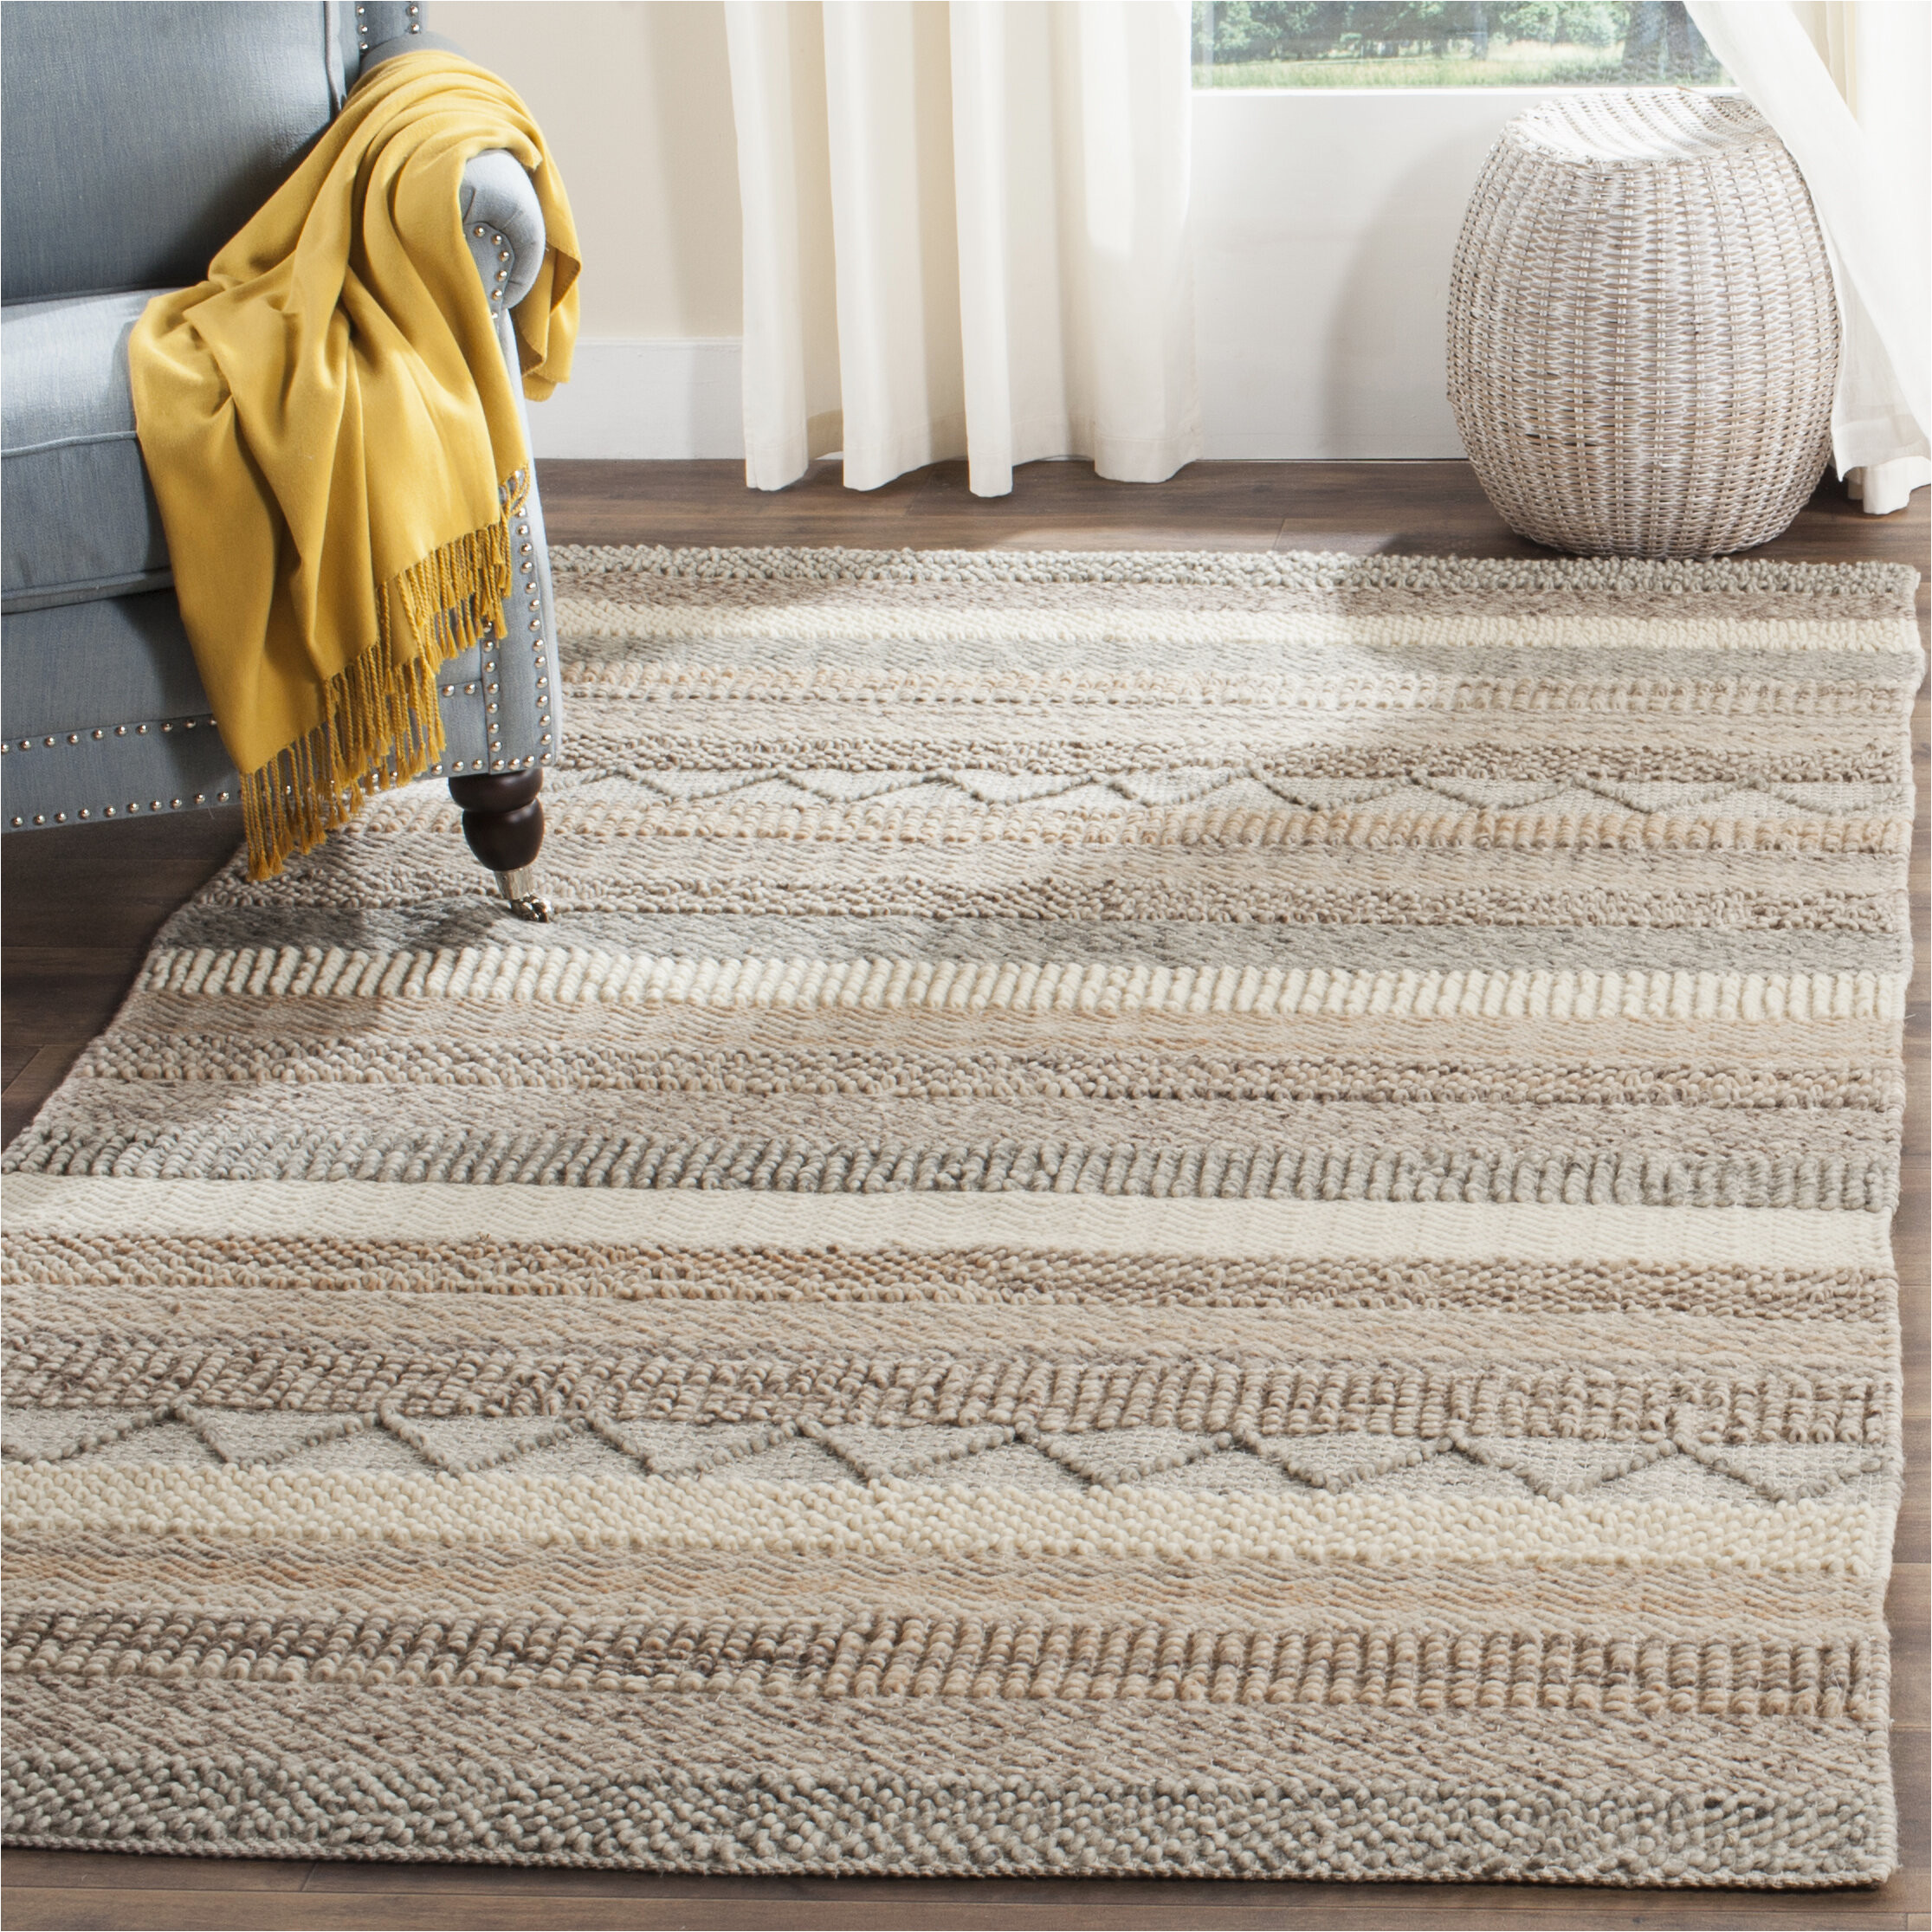 12 X 18 area Rugs for Sale Jacques Striped Handmade Flatweave Wool/cotton Beige area Rug